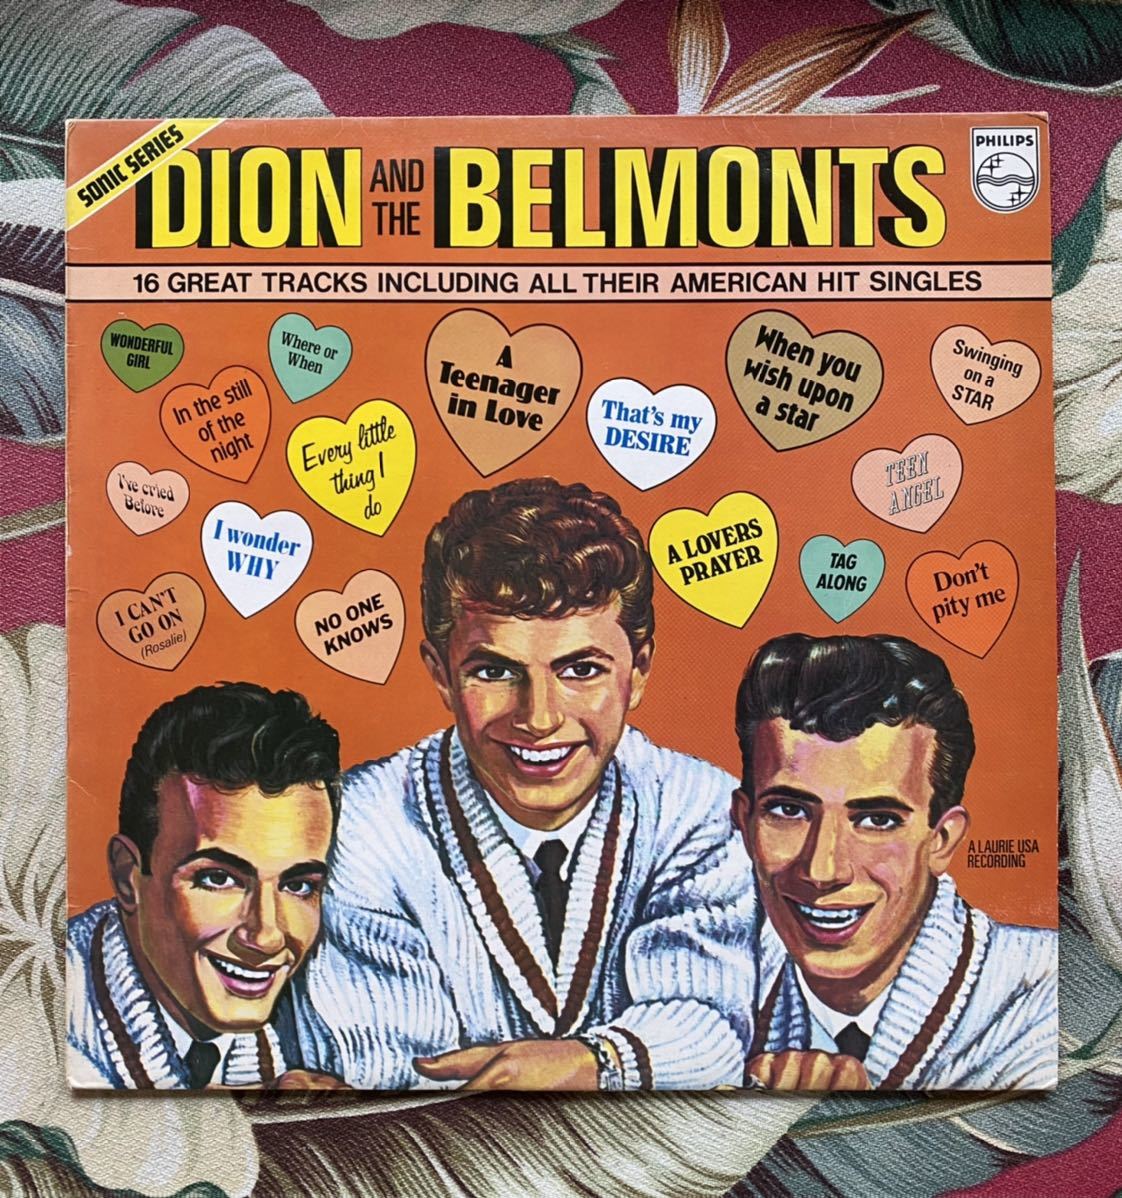 Dion And The Belmonts LP Pick Hits Of The Radio Good Guys Vol.3 Doo Wop ロカビリー_画像1